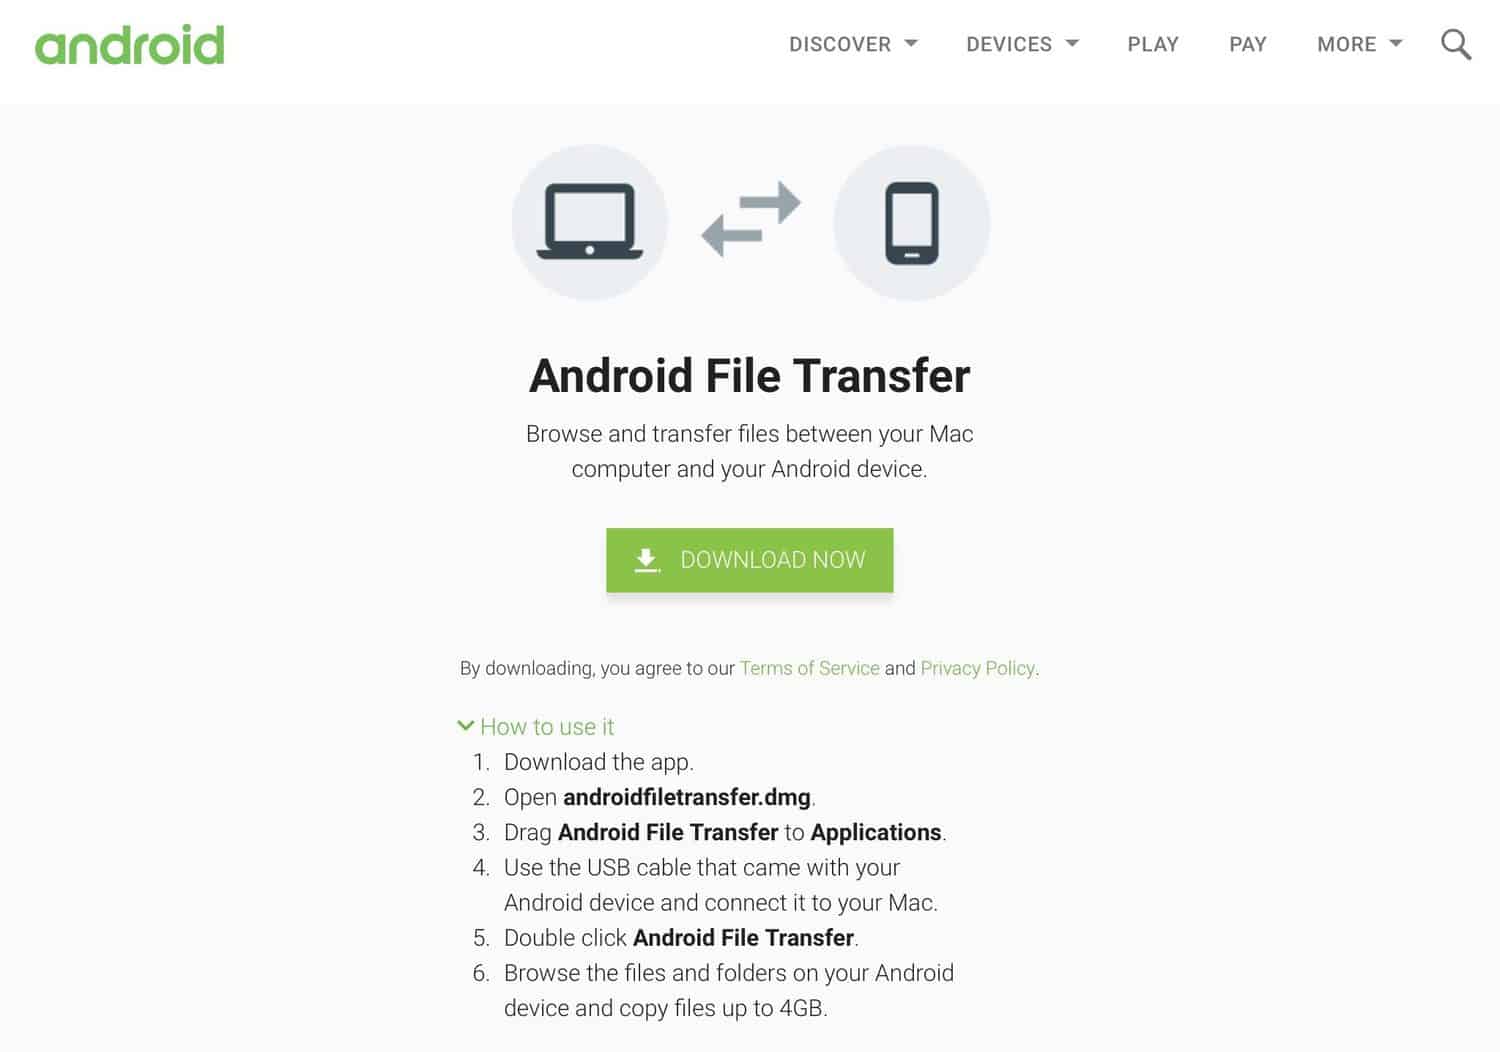 android file transfer could not connect